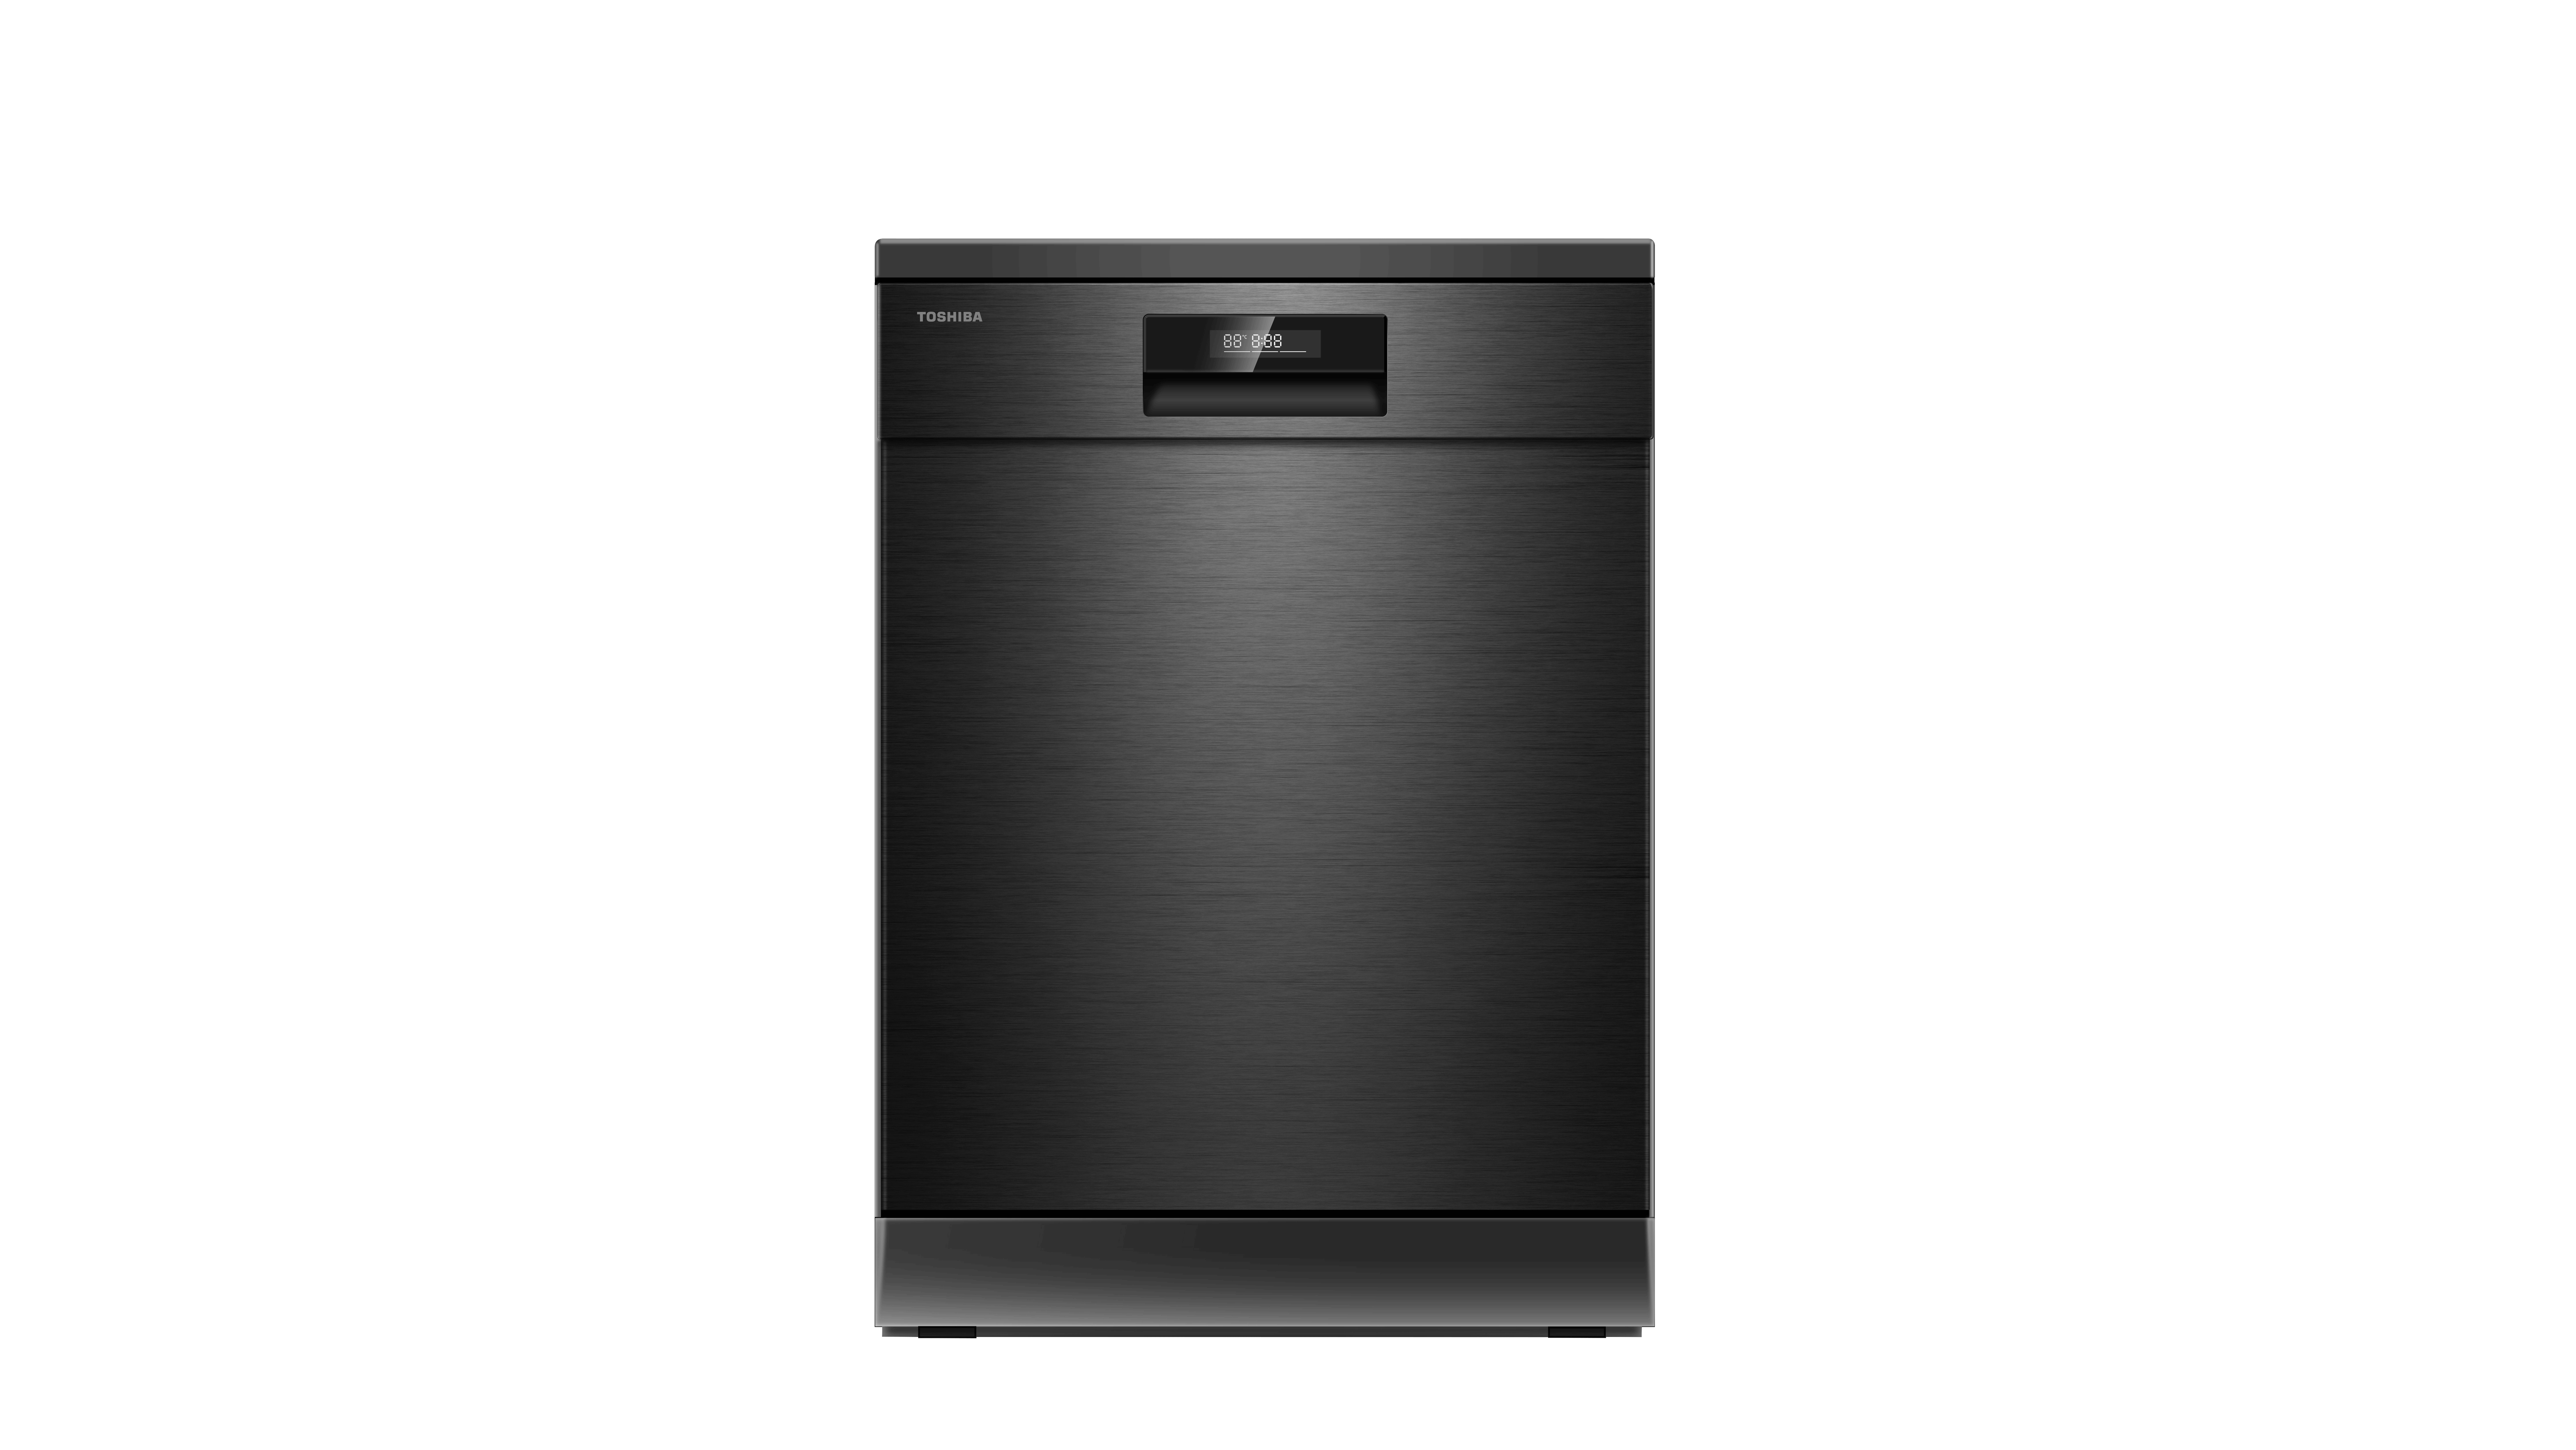 14 PLACE SETTING, FREE STANDING DISHWASHER, WITH 70°C HOT WATER WASH